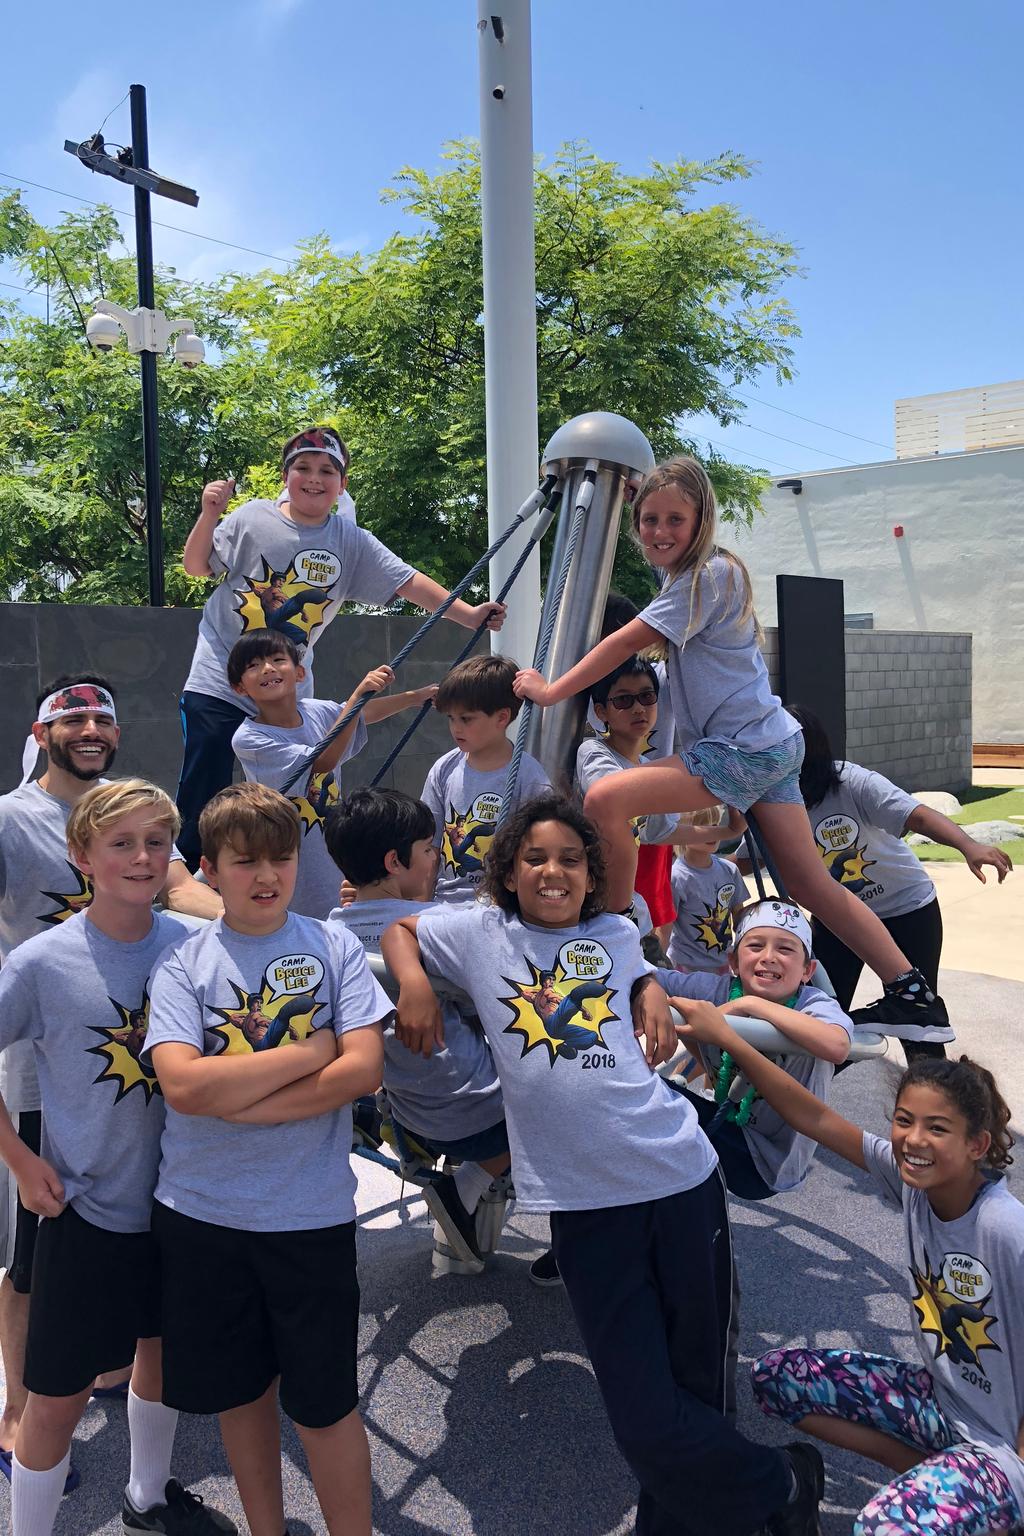 CAMP BRUCE LEE In the summer of 2018, the Bruce Lee Foundation held the first-ever Camp Bruce Lee.